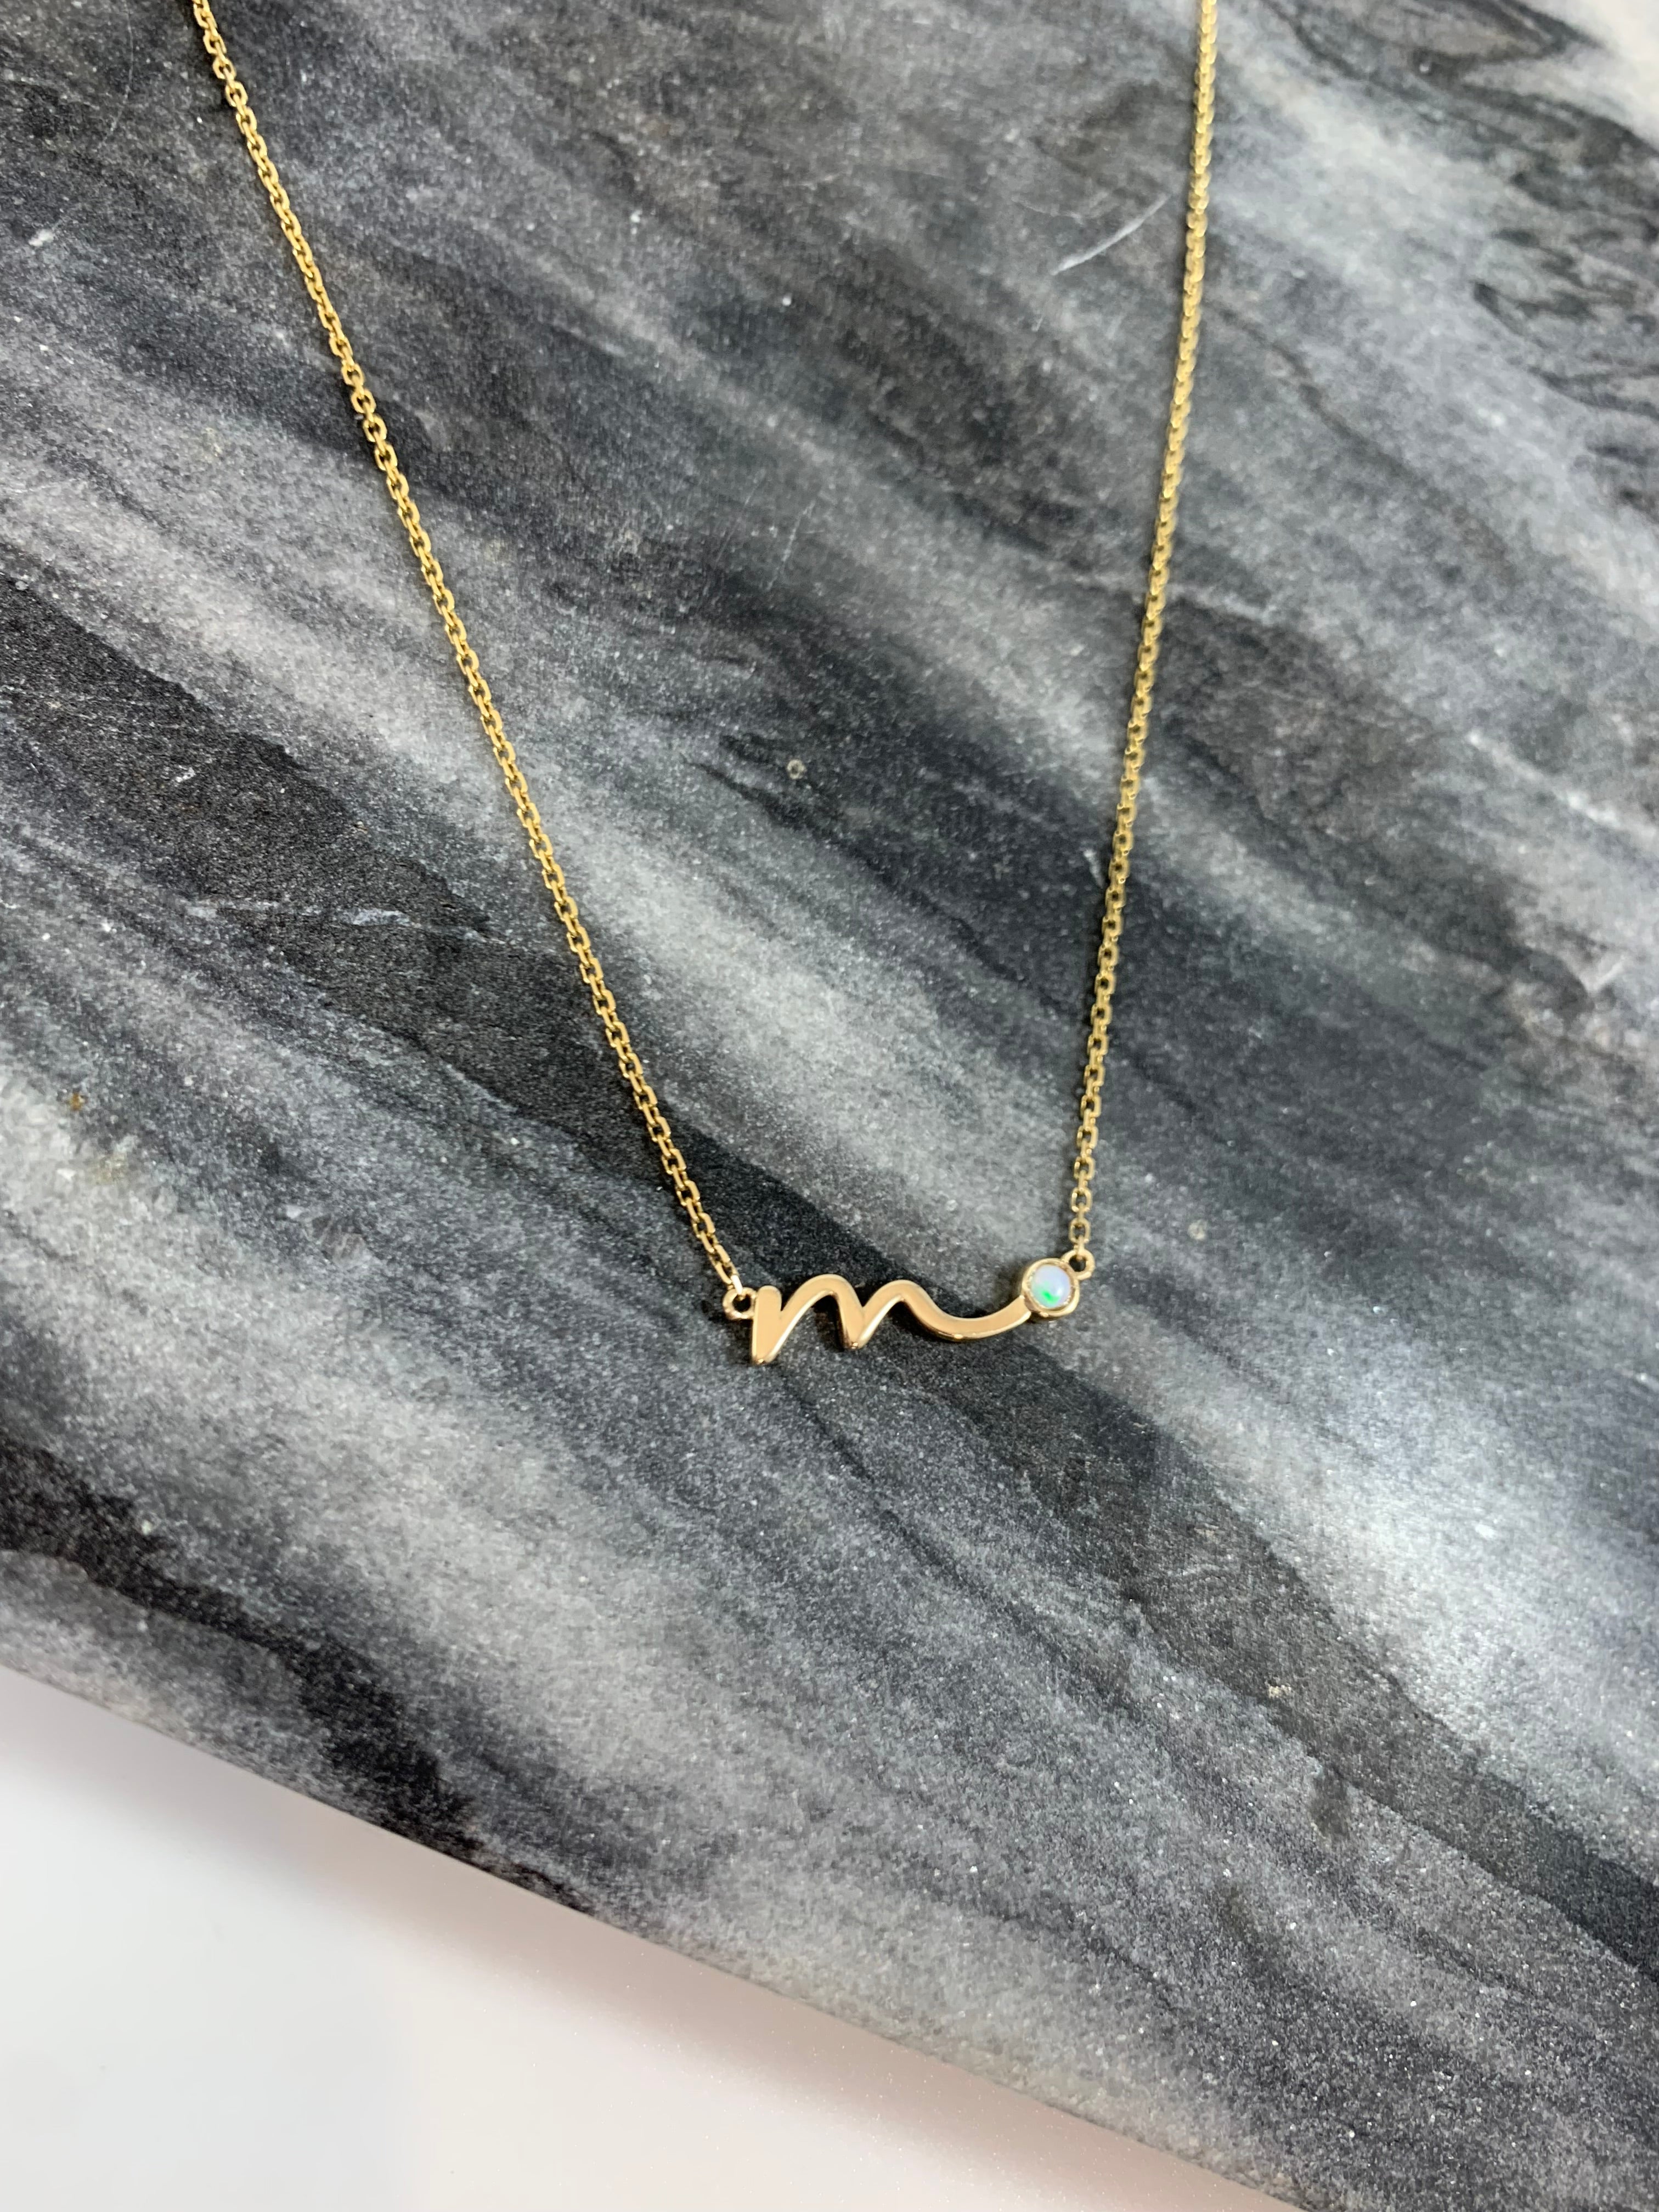 10k Yellow Gold "M" with Opal Necklace